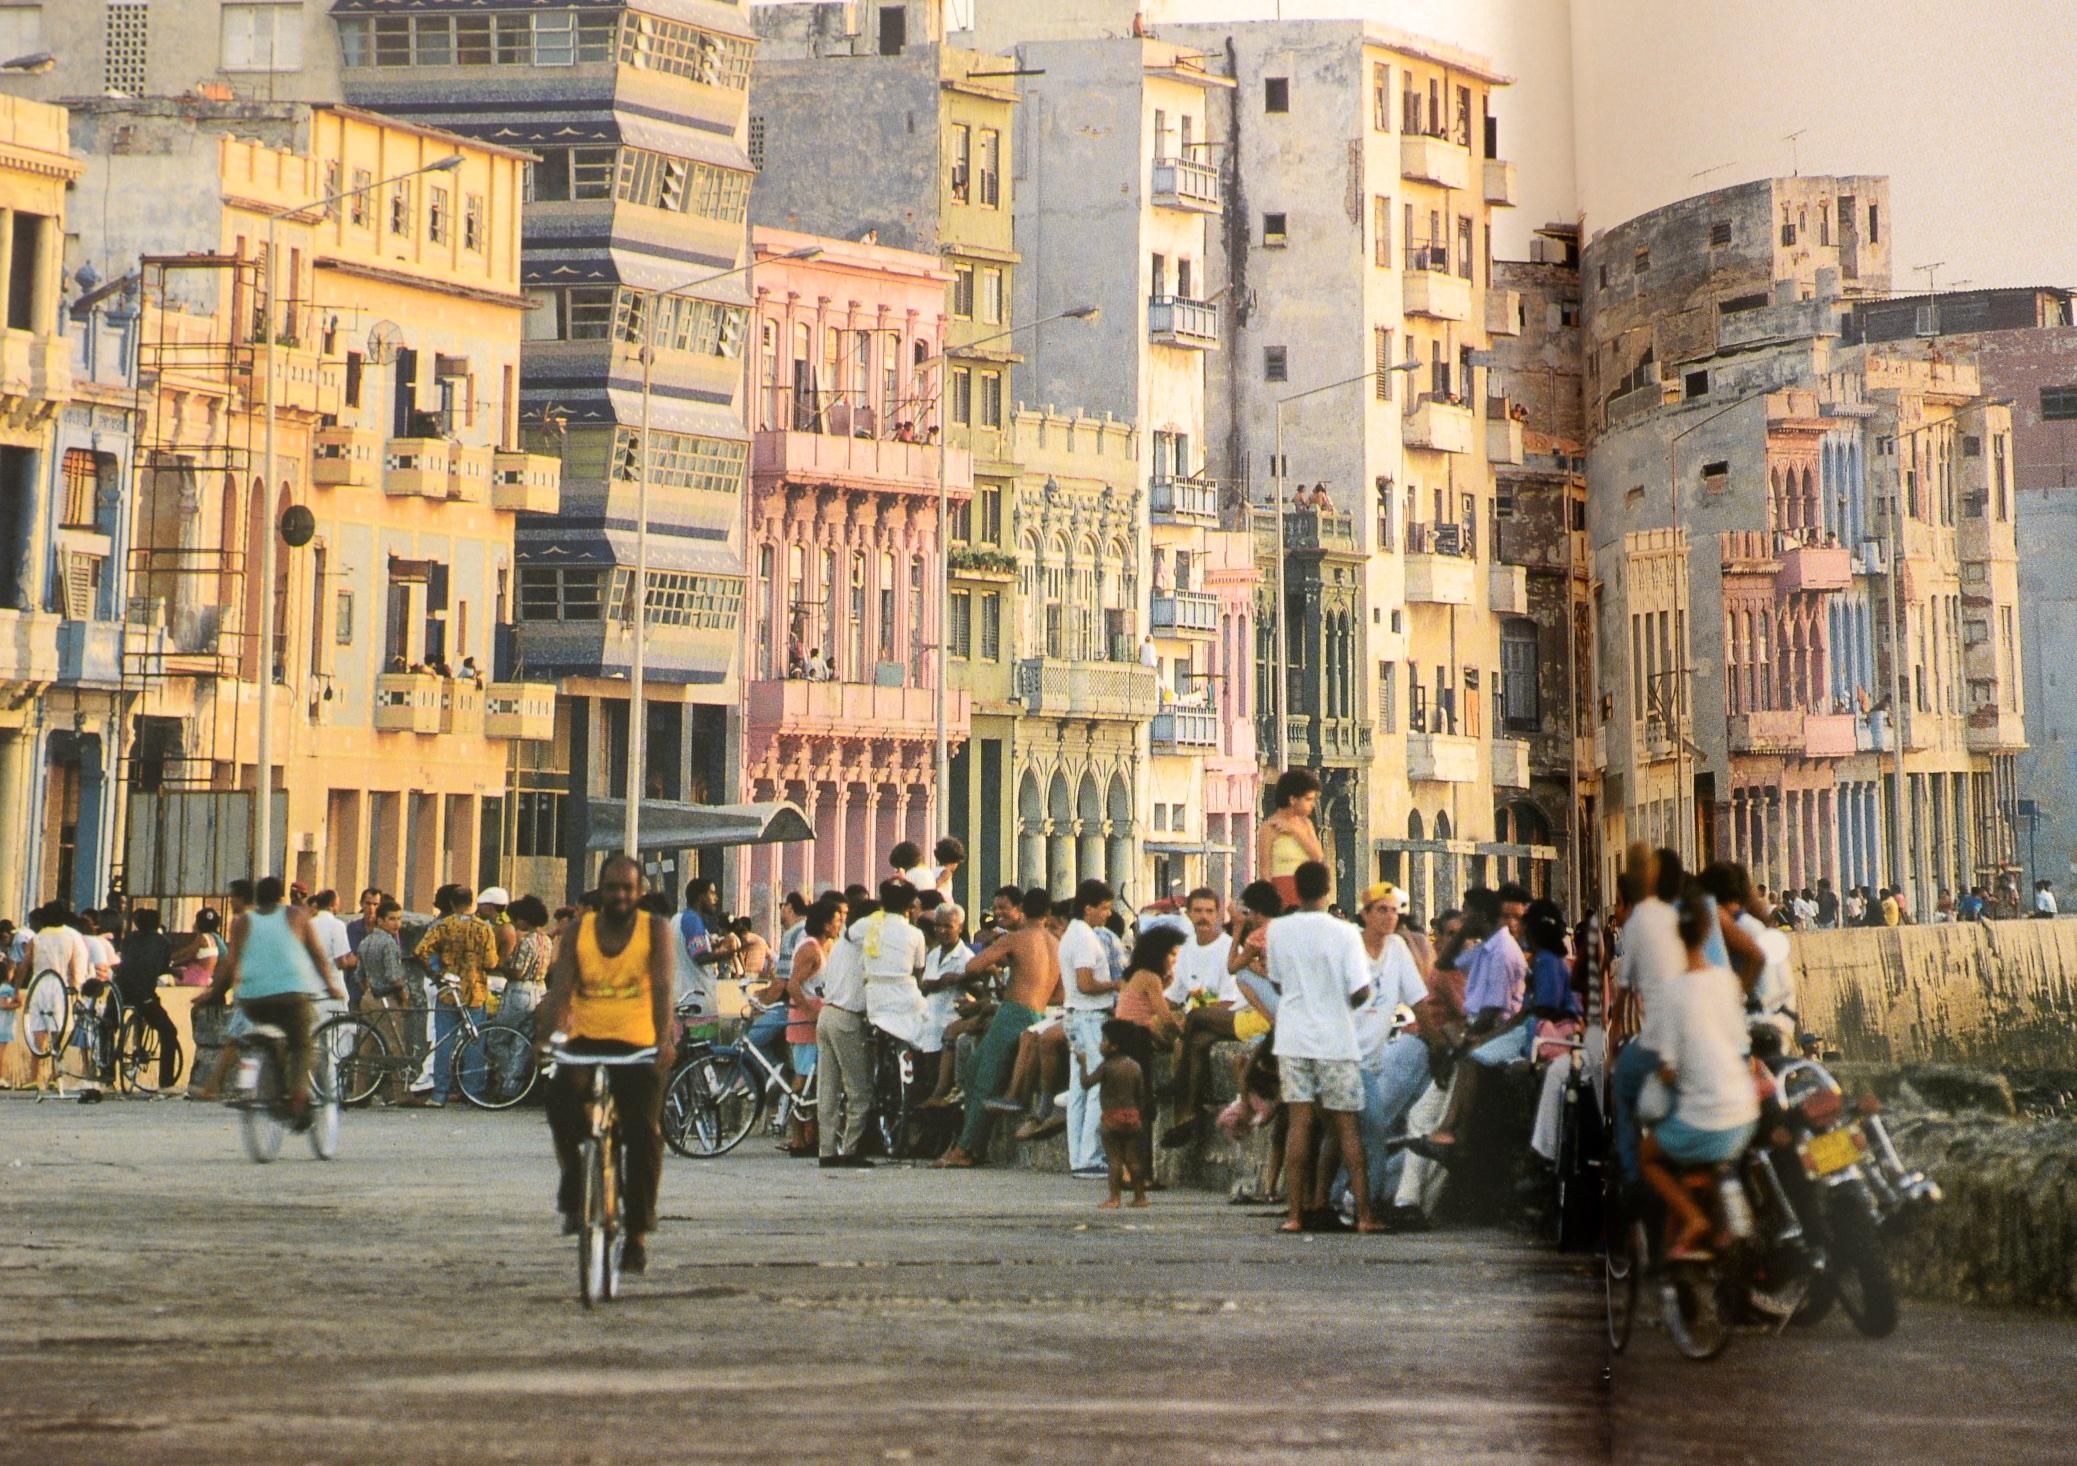 Cuba: 400 Years of Architectural Heritage by Rachel Carley, Stated 1st Printing 6